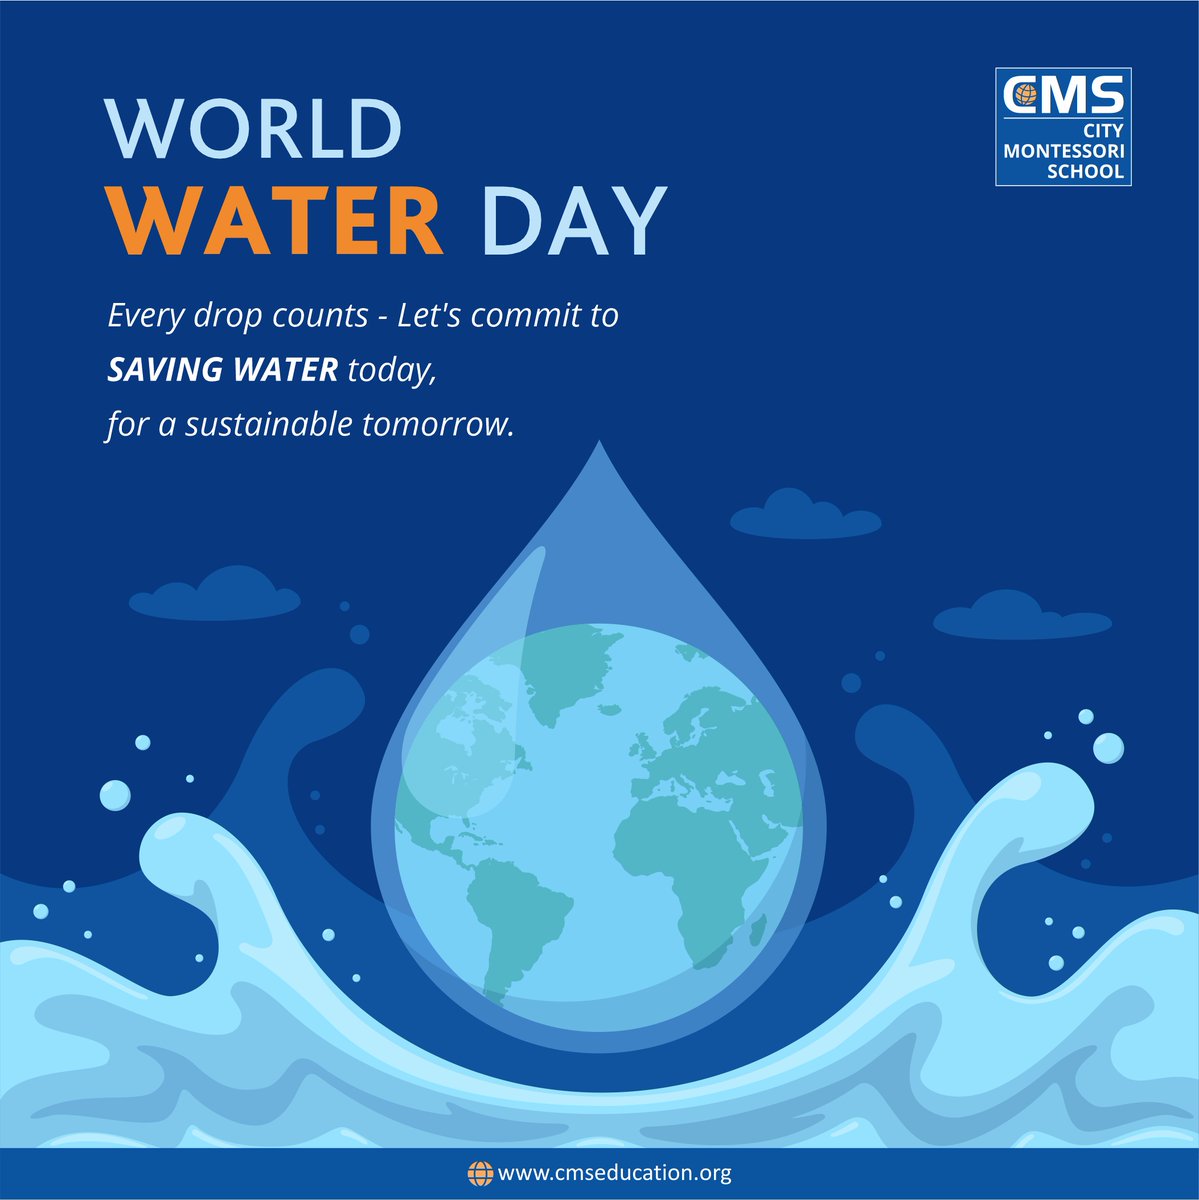 Water is life, let's cherish and preserve it together. 💙💧

Happy World Water Day!

#CMS #CMSeducation #CMSStudents #AcademicExcellence #OutstandingTeachers #InspiringLeaders #HighAchiever #CMSActivity #WorldWaterDay #EveryDropCounts